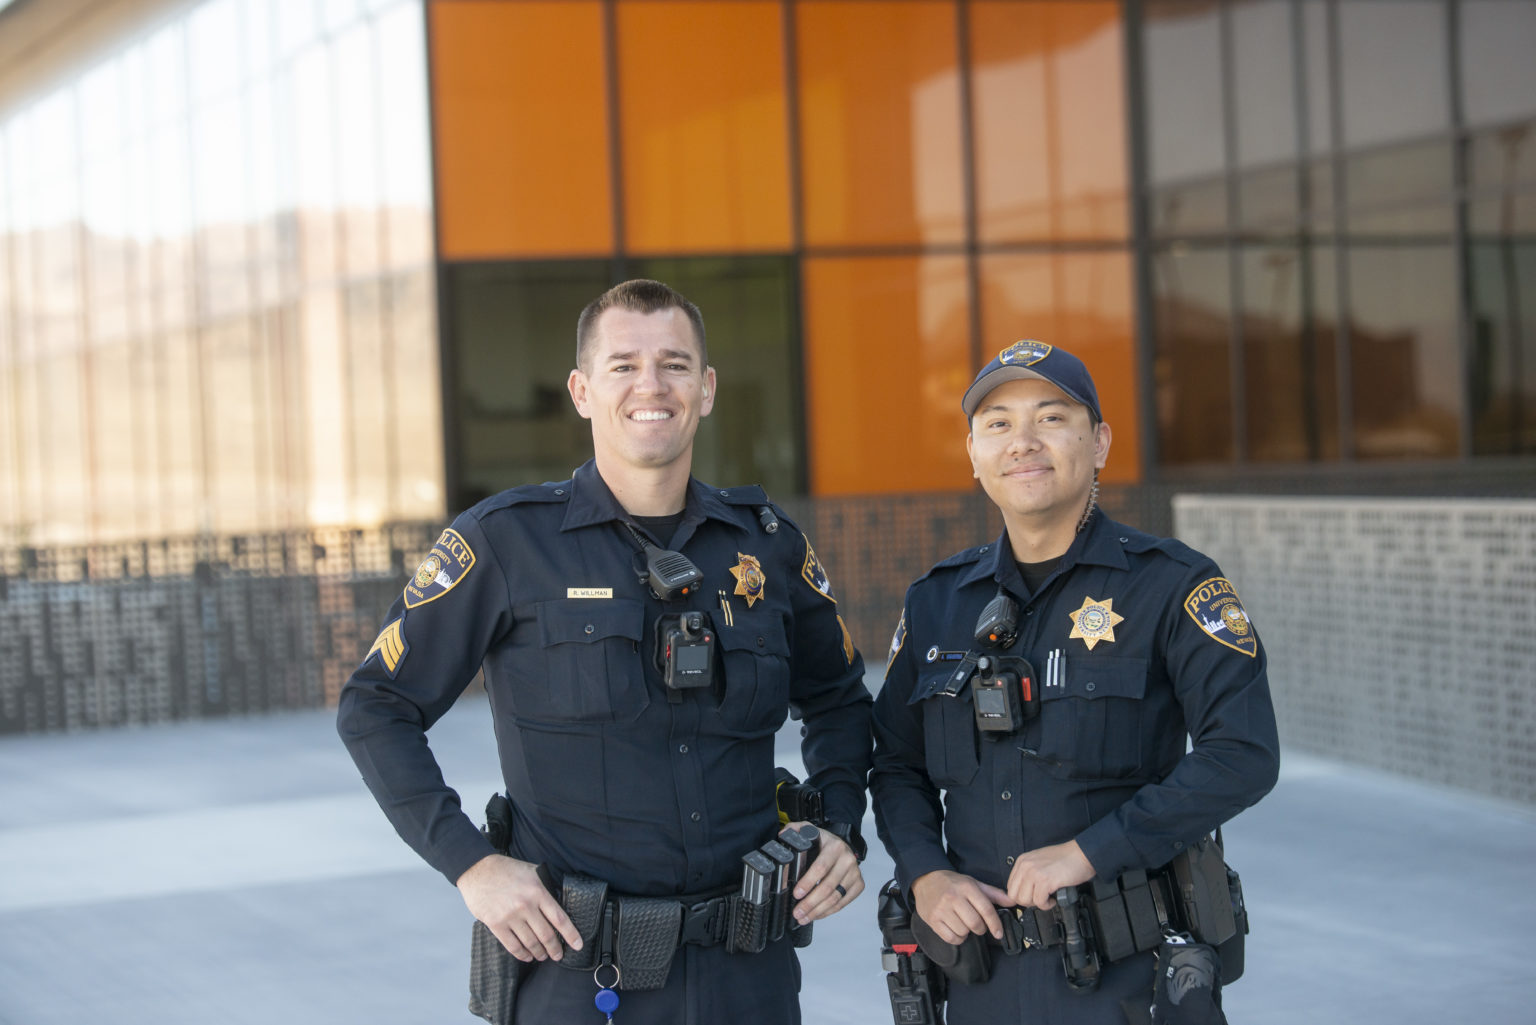 Two campus police officers